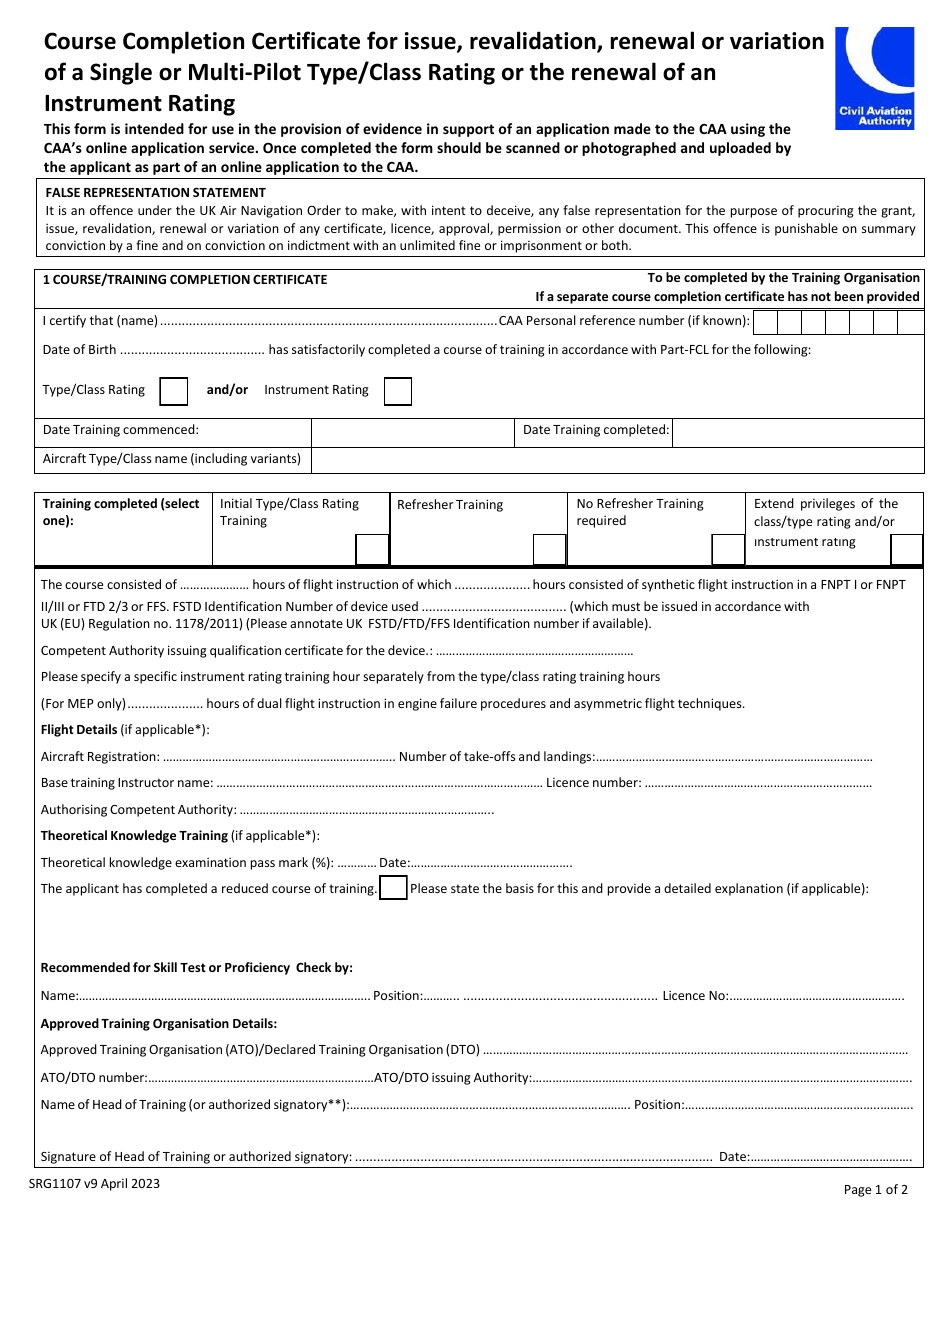 Form SRG1107 Course Completion Certificate for Issue, Revalidation, Renewal or Variation of a Single or Multi-Pilot Type / Class Rating or the Renewal of an Instrument Rating - United Kingdom, Page 1